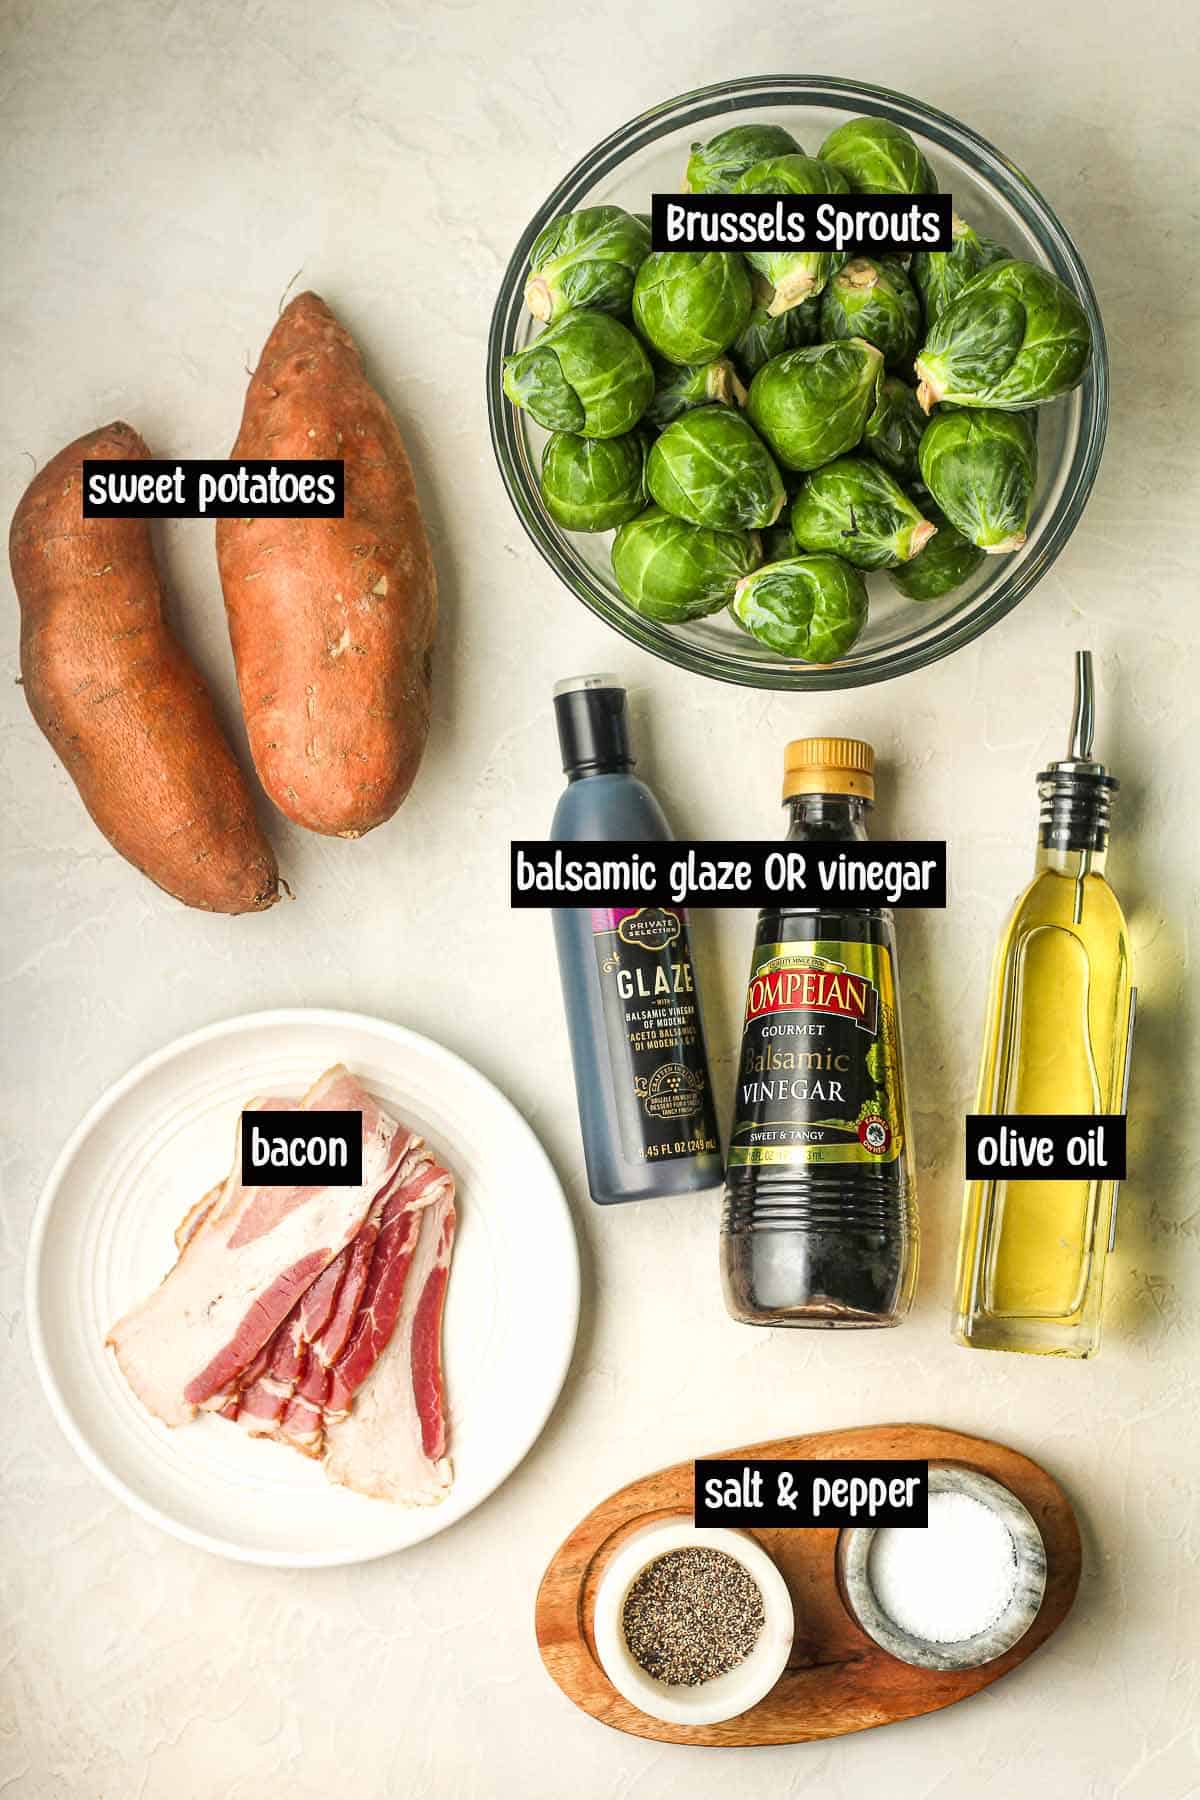 The ingredients for the roasted veggies.